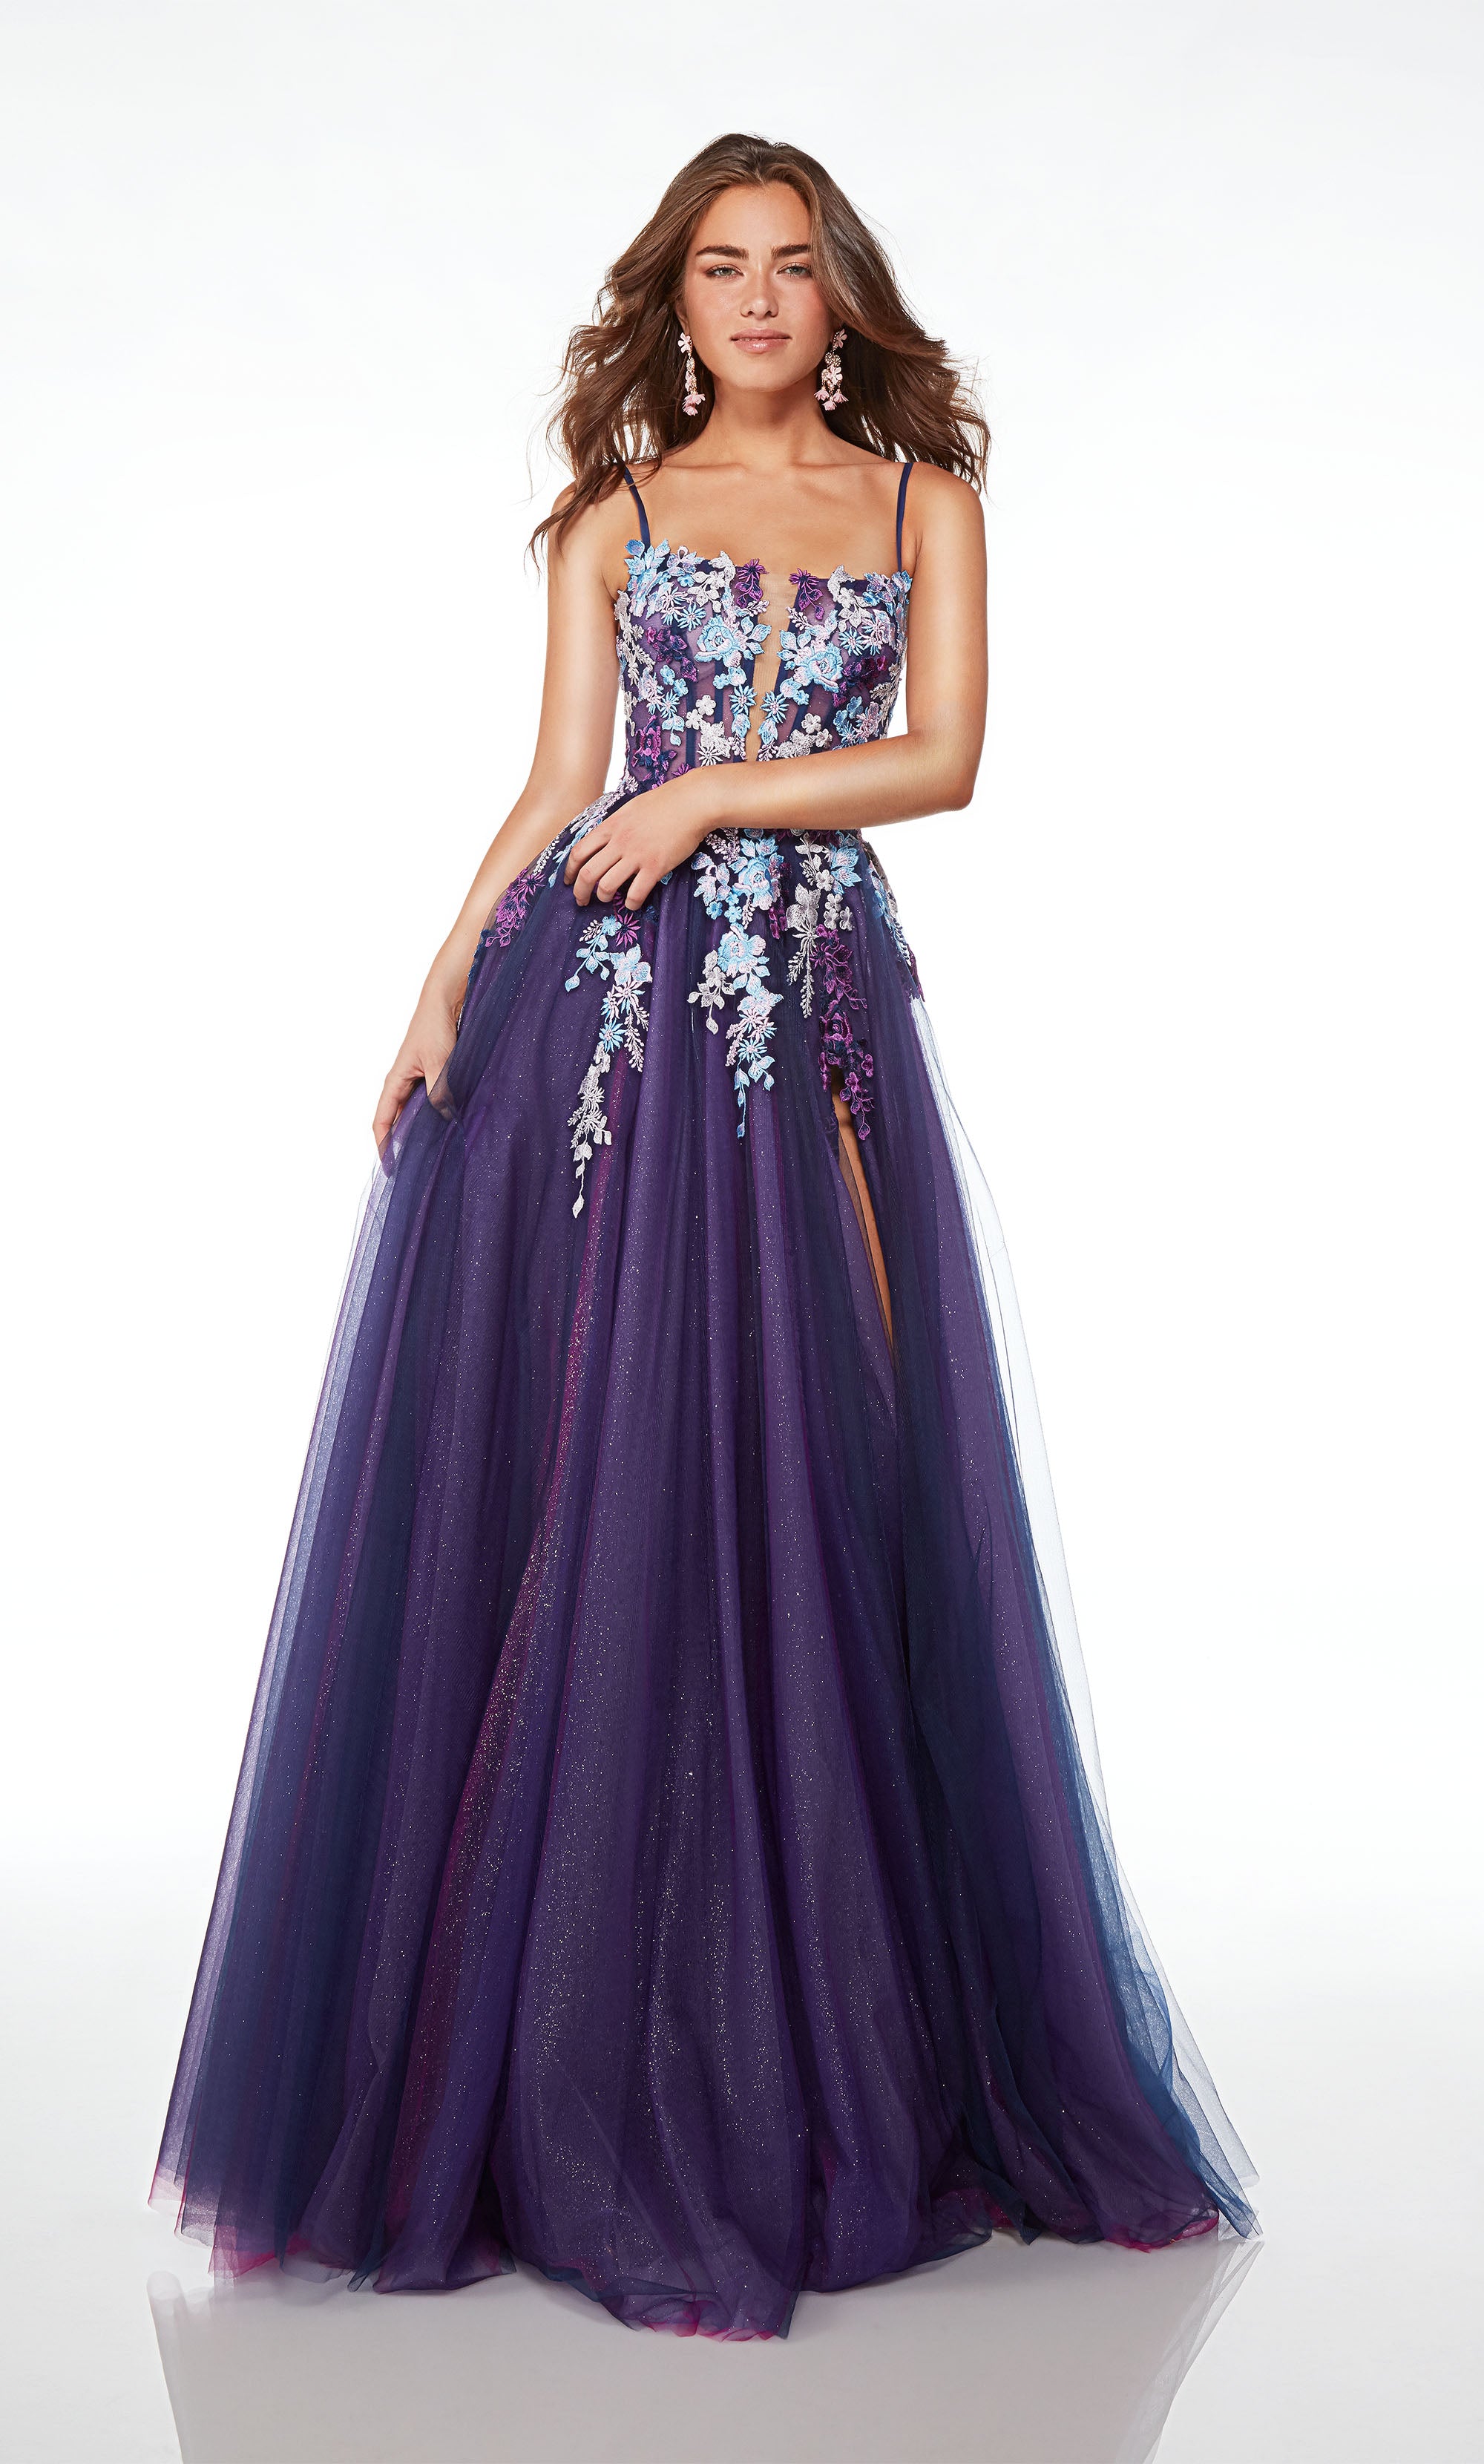 Purple-multi A-line tulle gown with an sheer corset bodice, high slit, spaghetti straps, lace-up back, slight train, and delicate floral lace appliques.